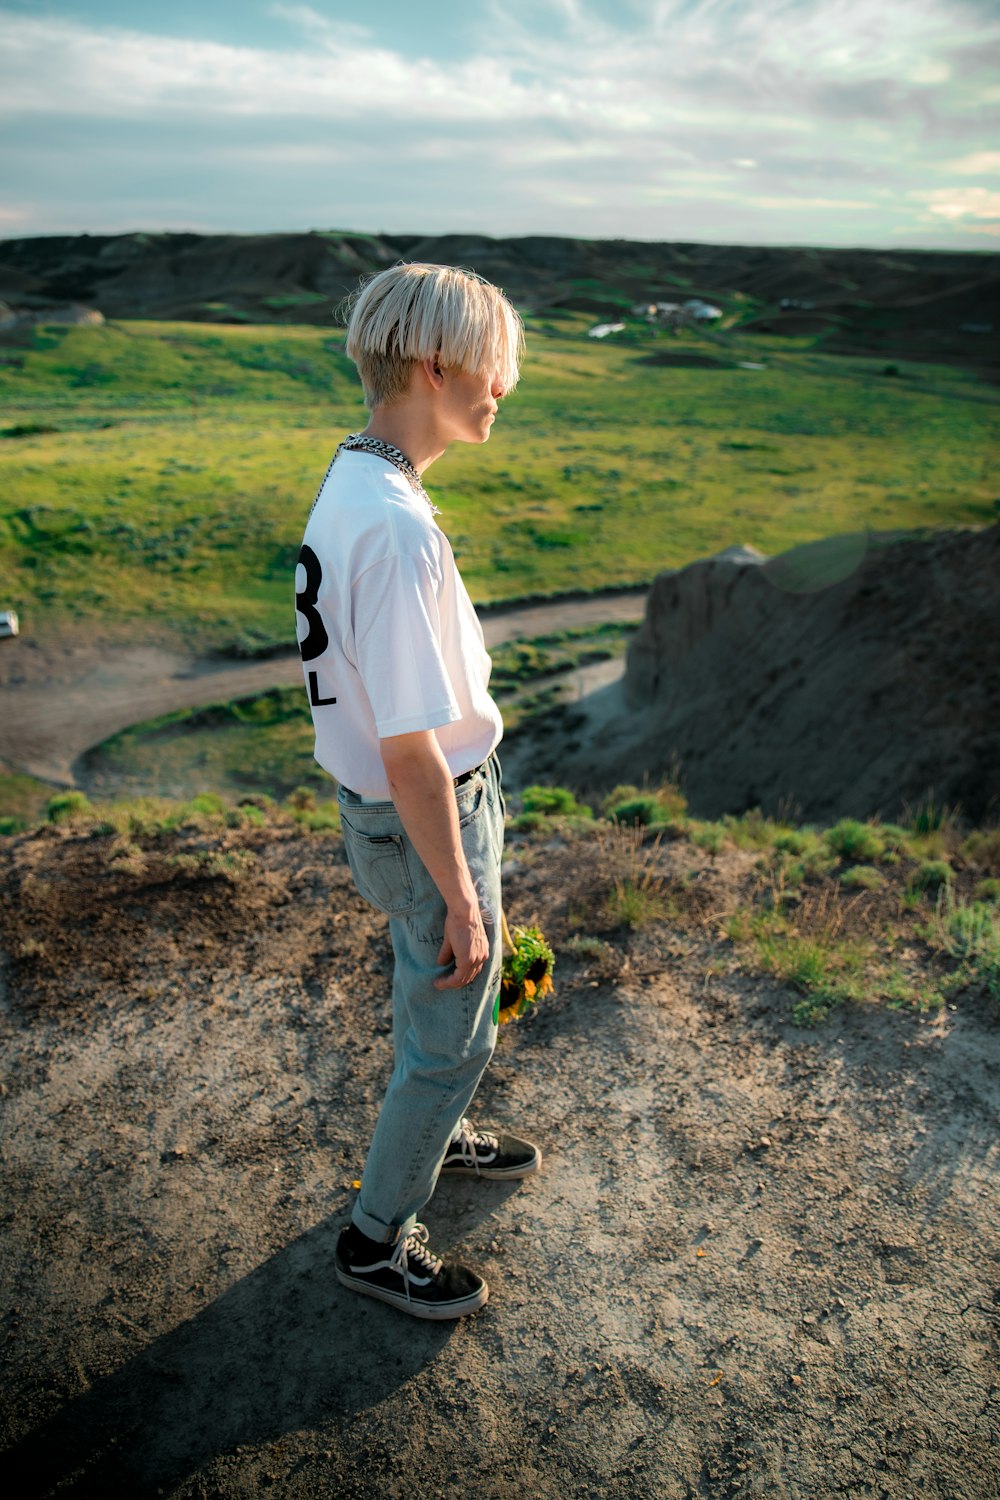 boy in white shirt and gray pants with black backpack walking on dirt road during daytime